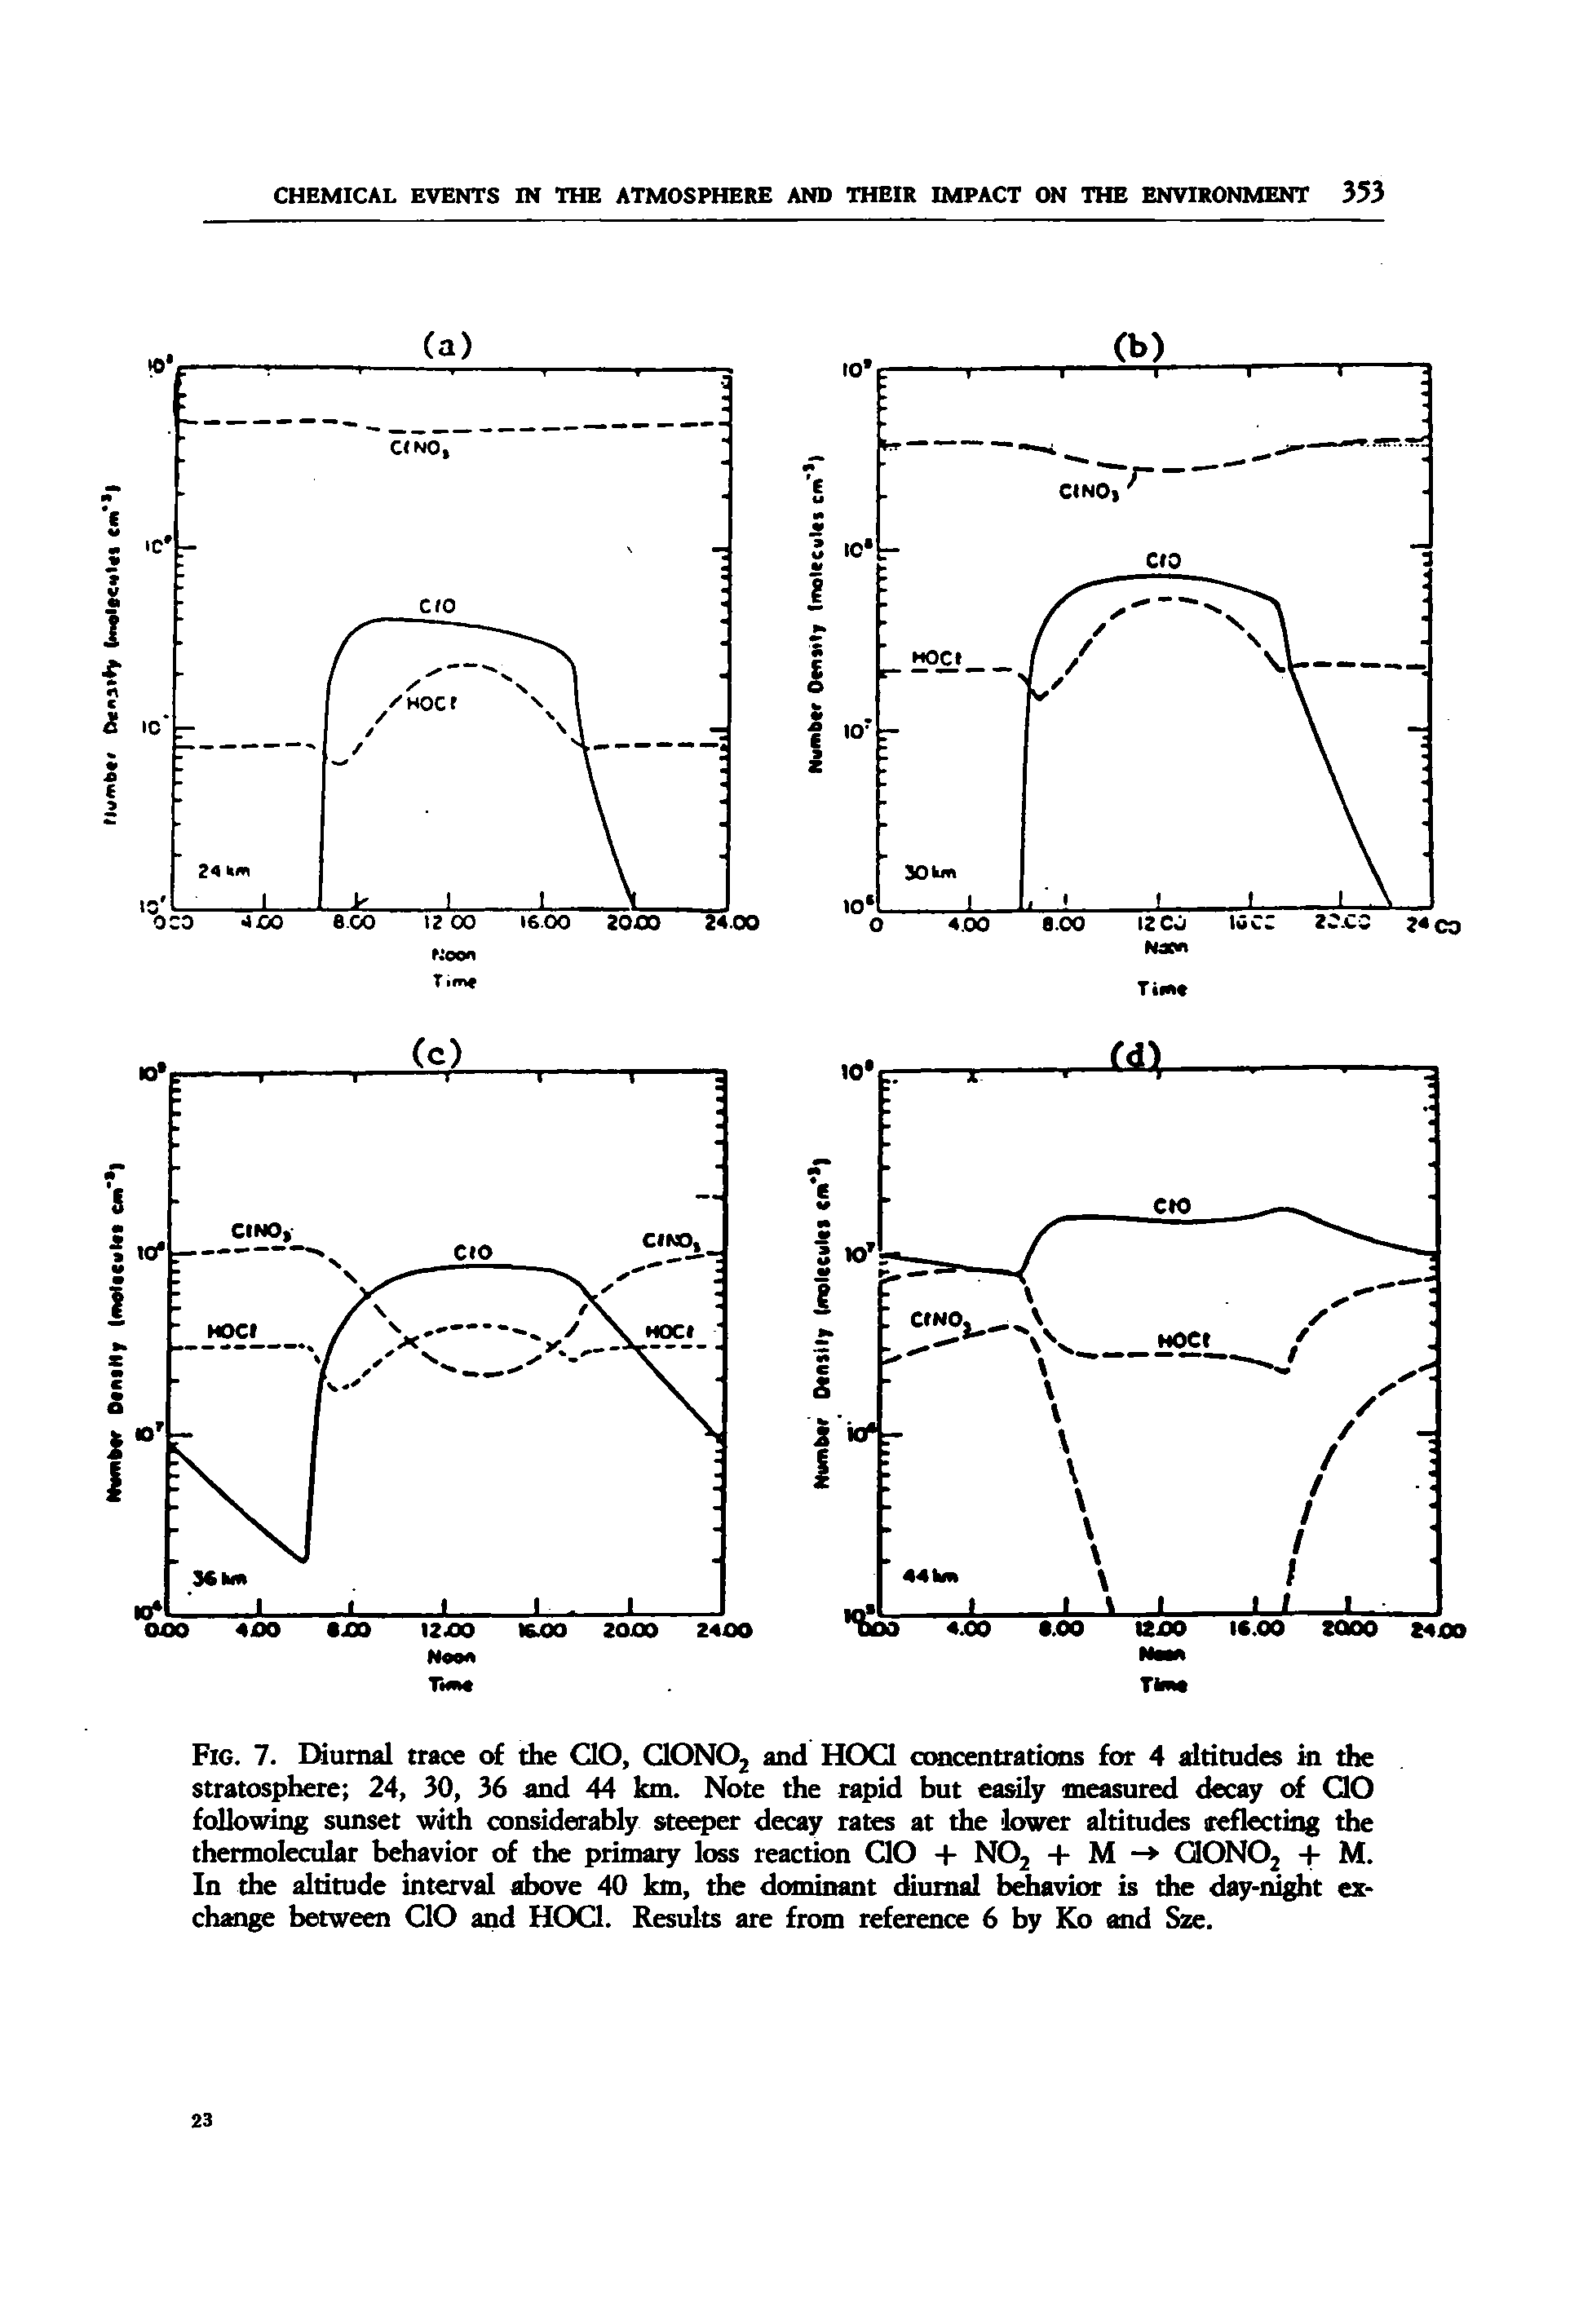 Fig. 7. IMumal trace of the OO, QONOj and HOQ oKtcenttatians for 4 altitudes in the stratosphere 24, 30, 36 and 44 km. Note the rapid but easily measured decay of QO fallowing sunset with considerably steeper decay rates at the lower altitudes reflecting the thermolecular behavior of the primary loss reaction QO + NOj + M - QONOj + M. In the altitude interval above 40 km, the dominant diurnal b vior is the day-idght exchange between QO and HOQ. Results are from reference 6 by Ko and Sze.